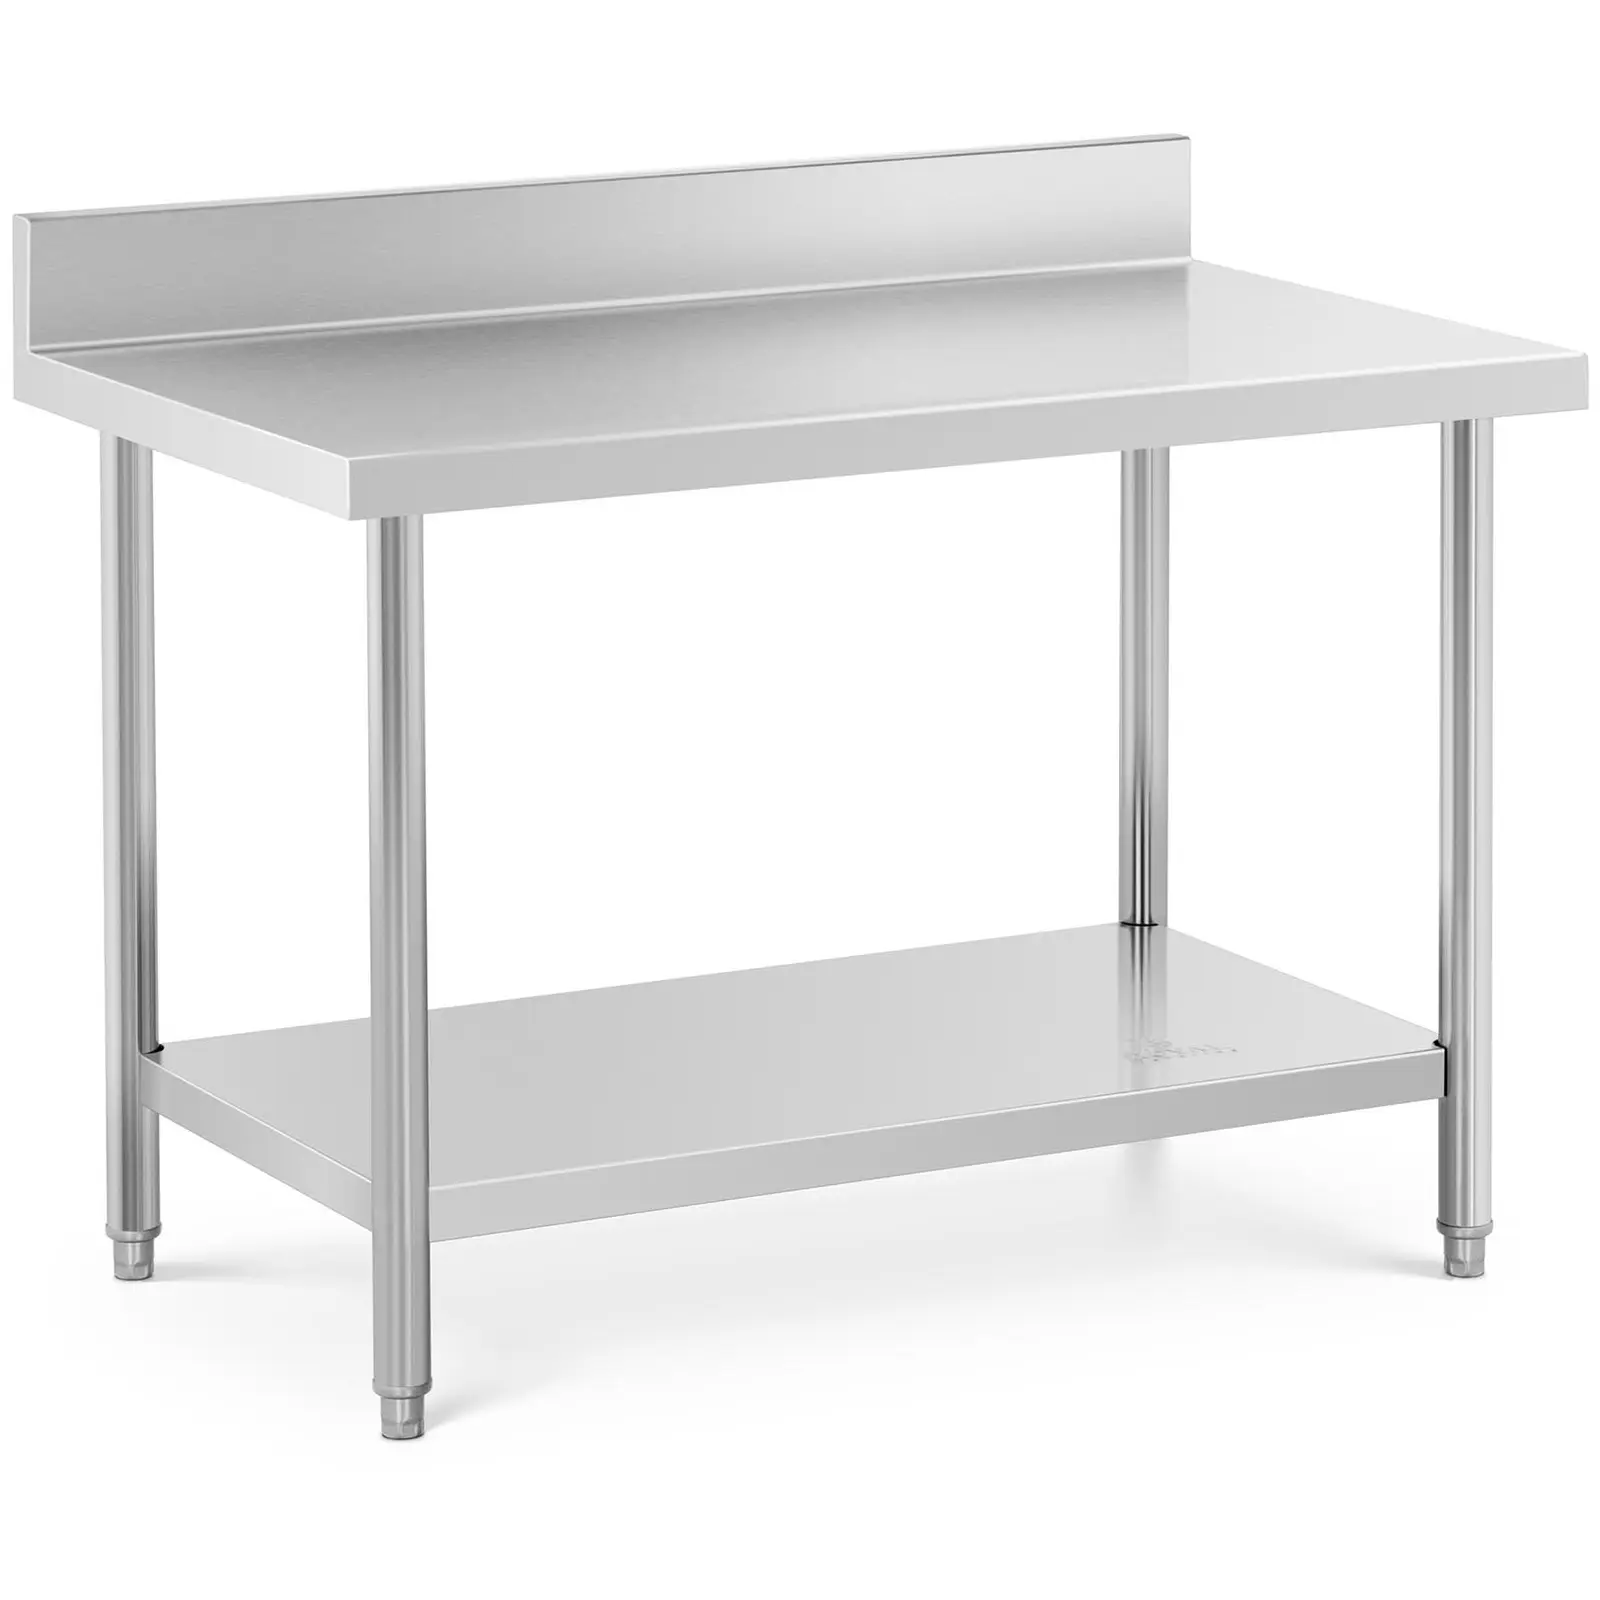 Stainless Steel Work Table - 120 x 70 cm - upstand - 115 kg capacity